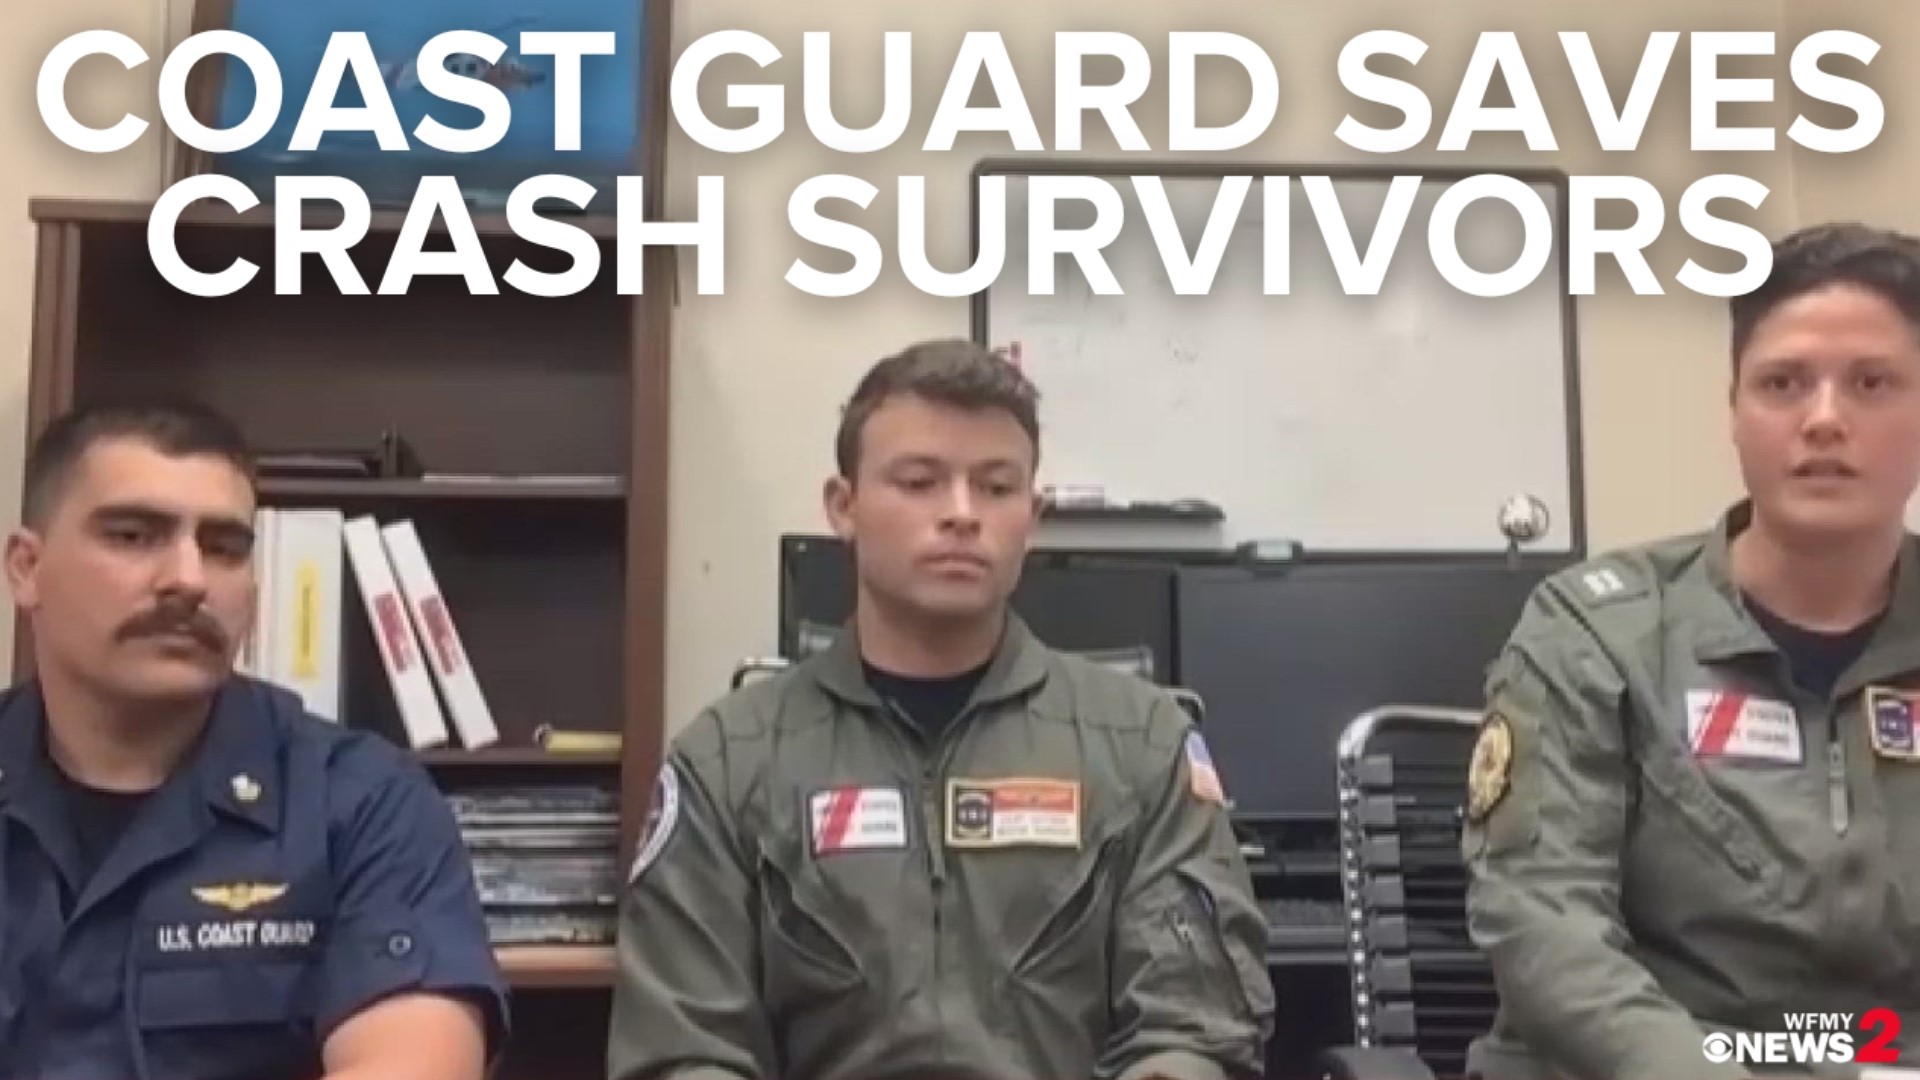 Amber Lake talked to the coast guard pilot, rescue swimmer, and flight mechanic who flew in to rescue the plane crash survivors.